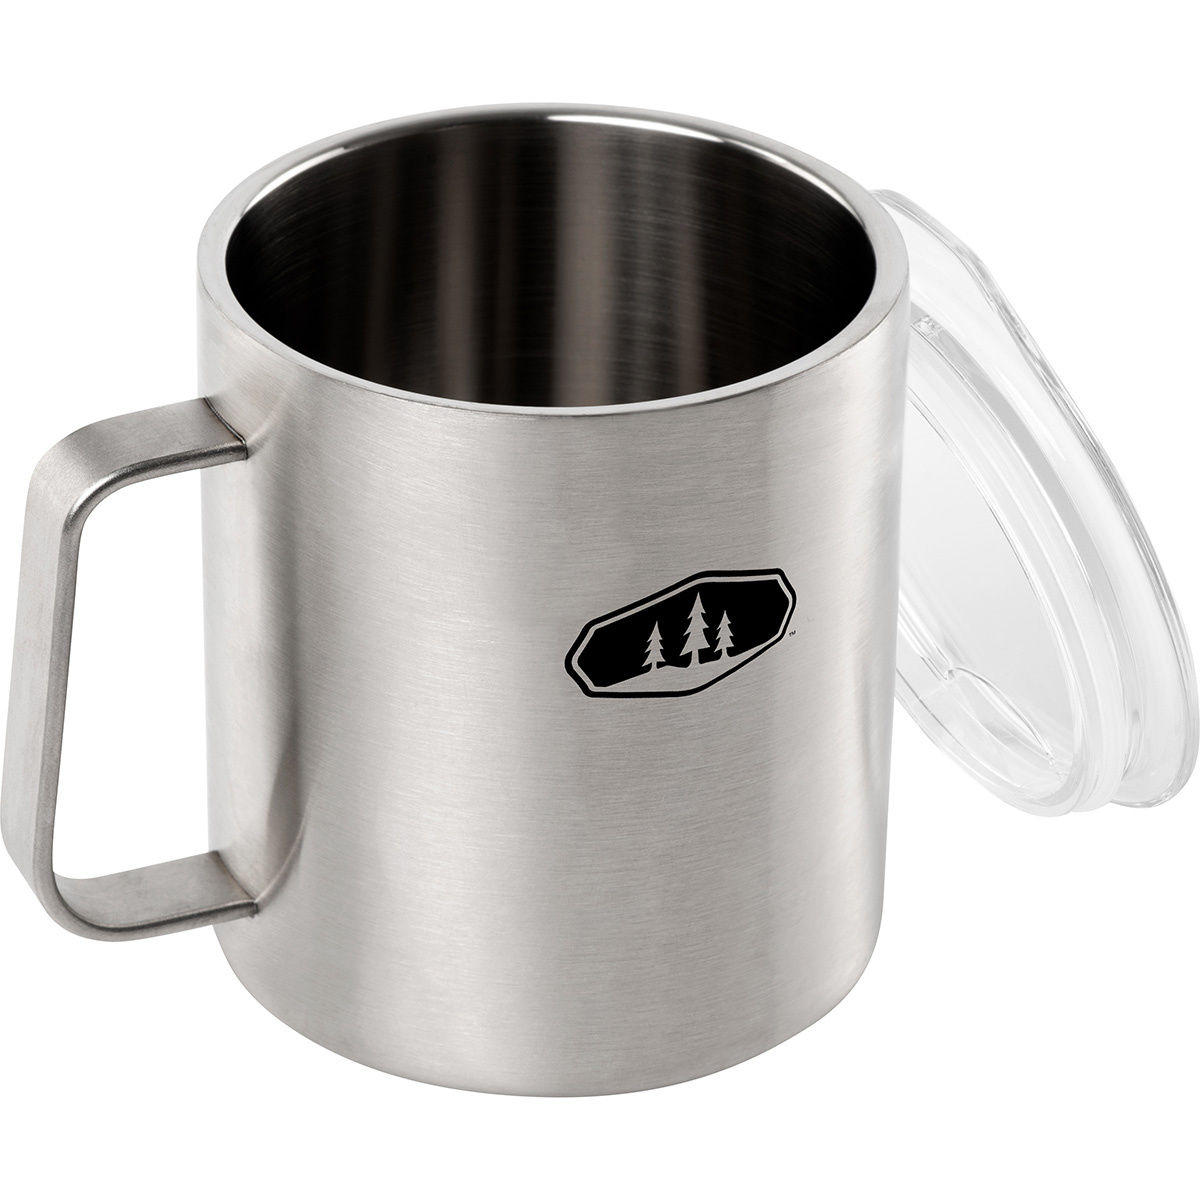 GSI Glacier Stainless 15oz Camp Cup Trinkbecher 2